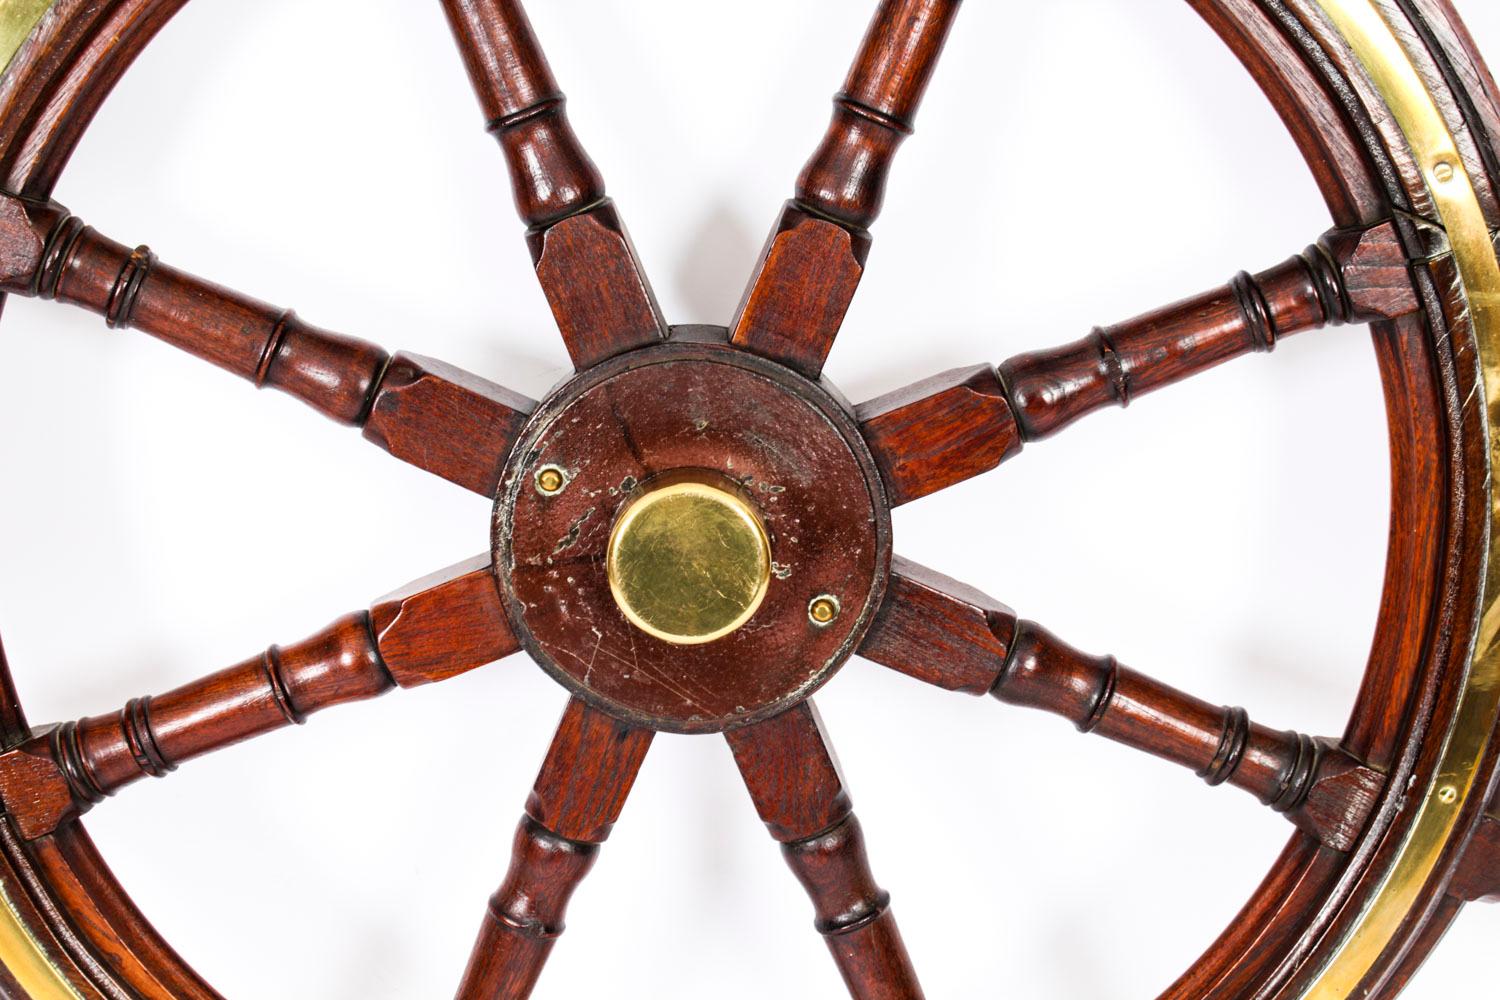 This is an elegant and large antique Victorian teak and brass set ships wheel, circa 1880 in date.

This splendid nautical collectable features eight stylish turn king cylindrical spokes ending in handles, and is made from beautiful high-quality